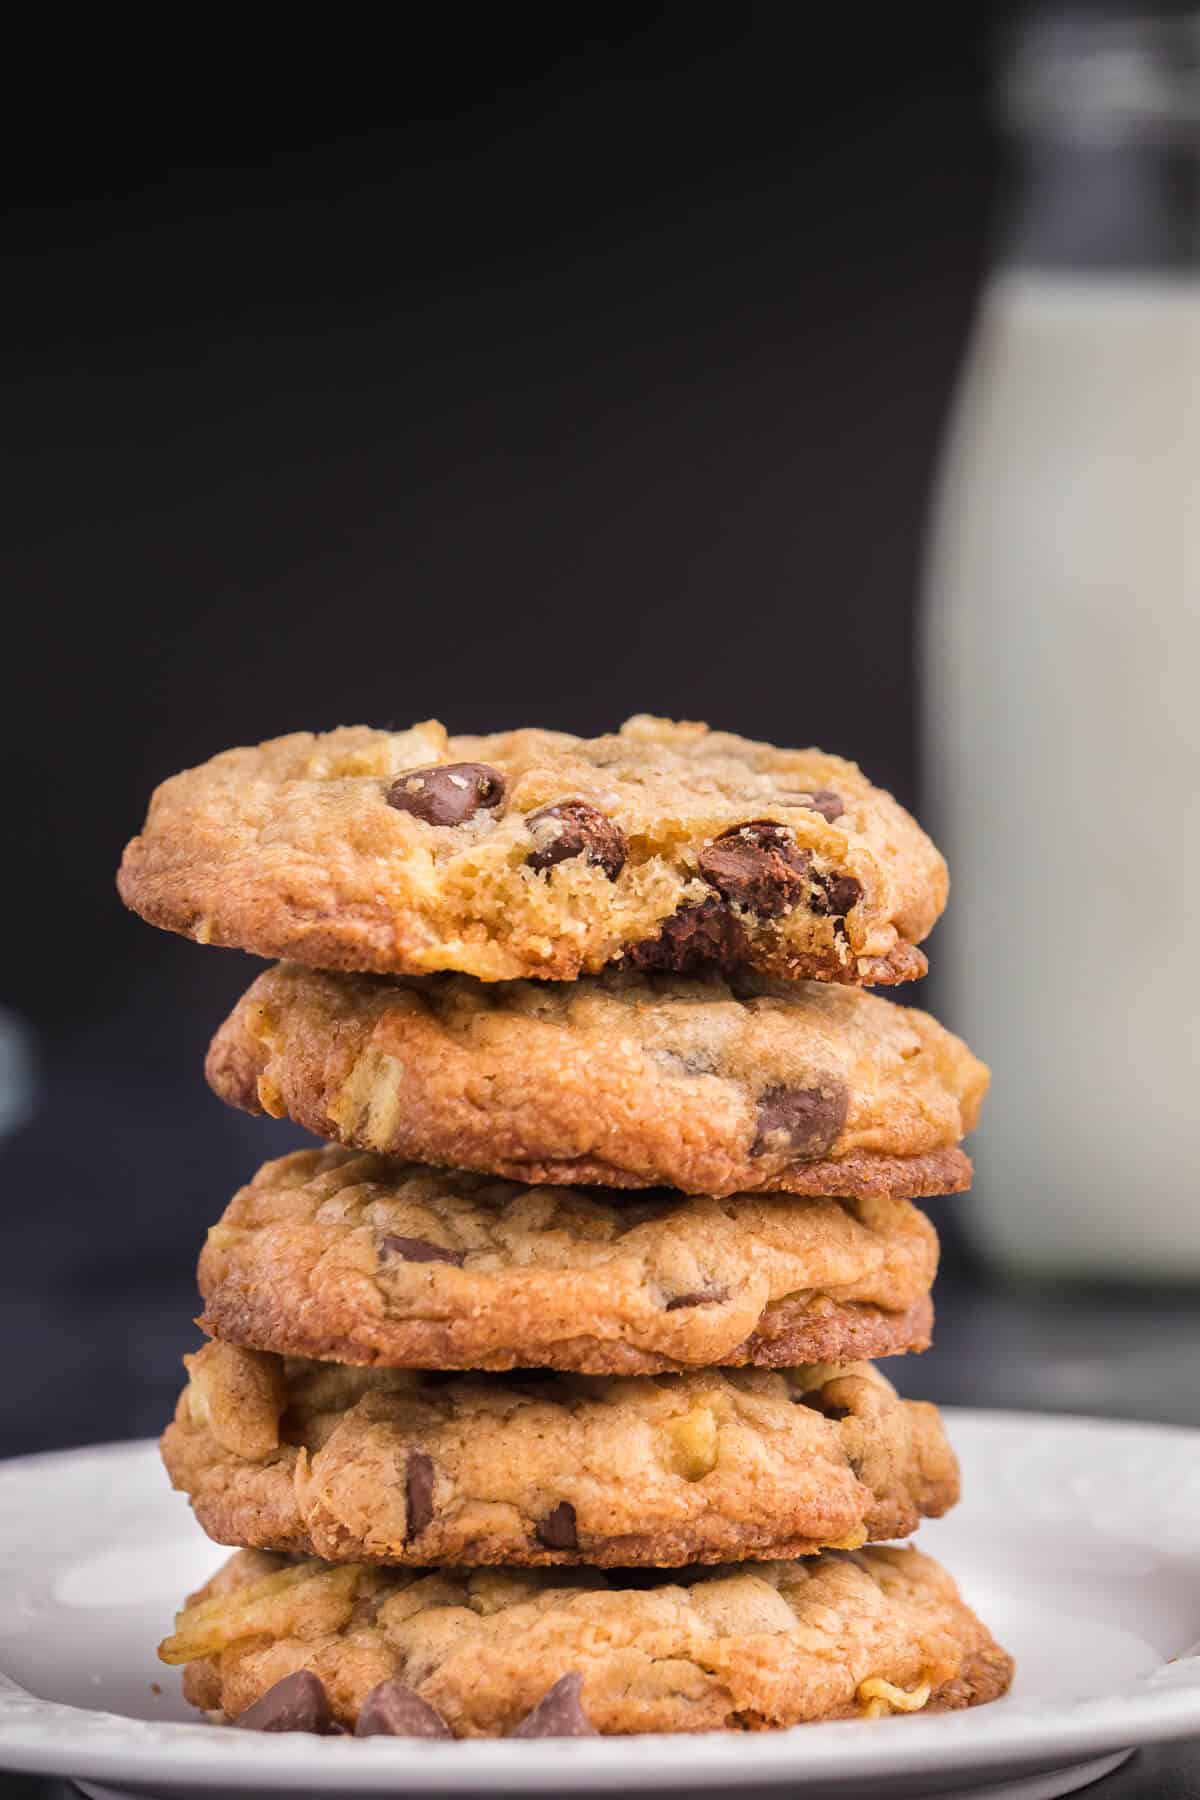 Potato Chip Cookies - The best cookie recipe to make when you're craving something salty and sweet! Packed with chocolate chips and potato chips, this easy dessert has just the right amount of crunch.